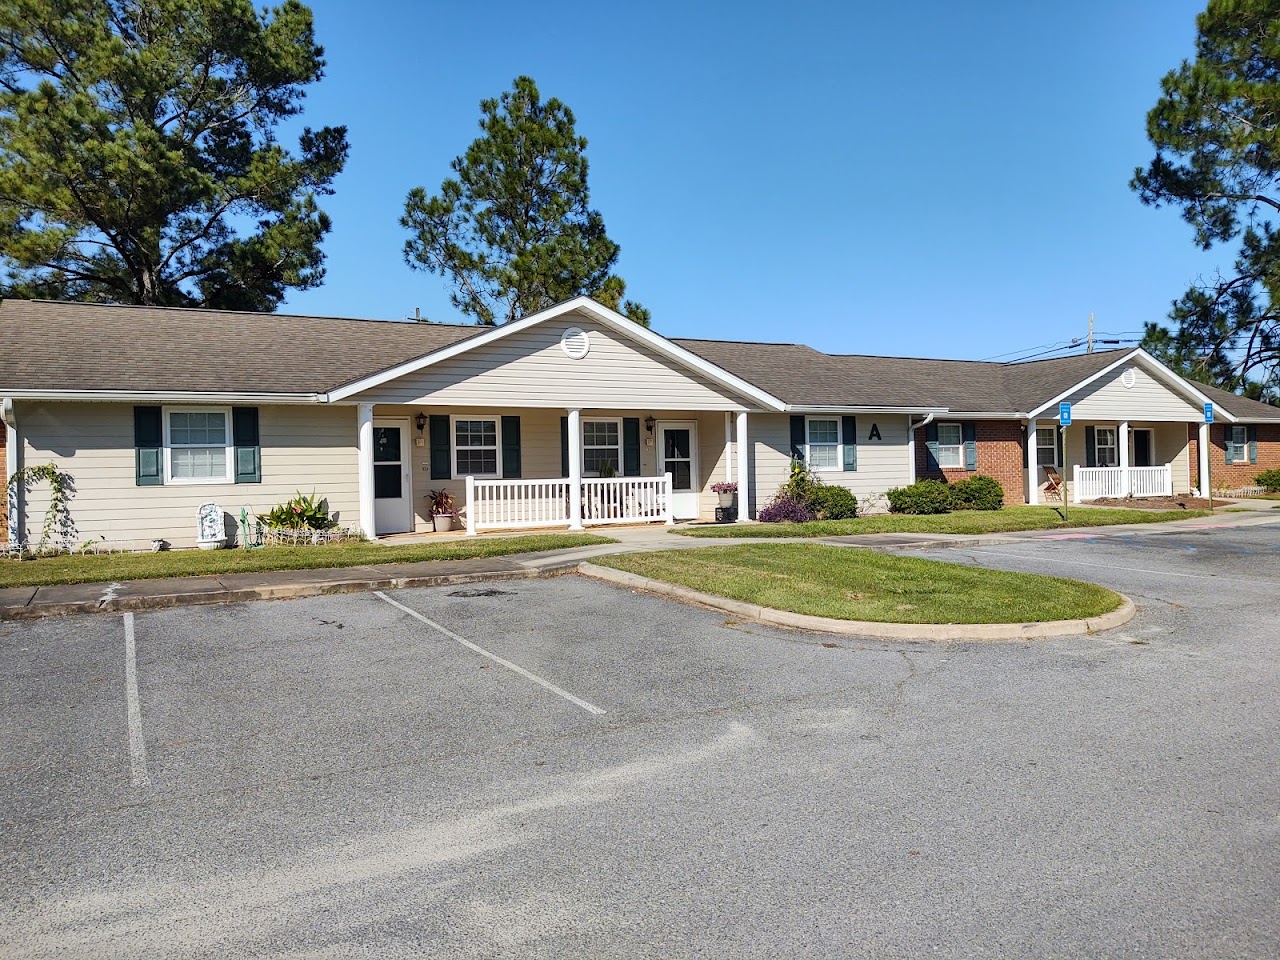 Photo of HERITAGE SQUARE ELDERLY. Affordable housing located at 307 W RAILROAD ST S PELHAM, GA 31779